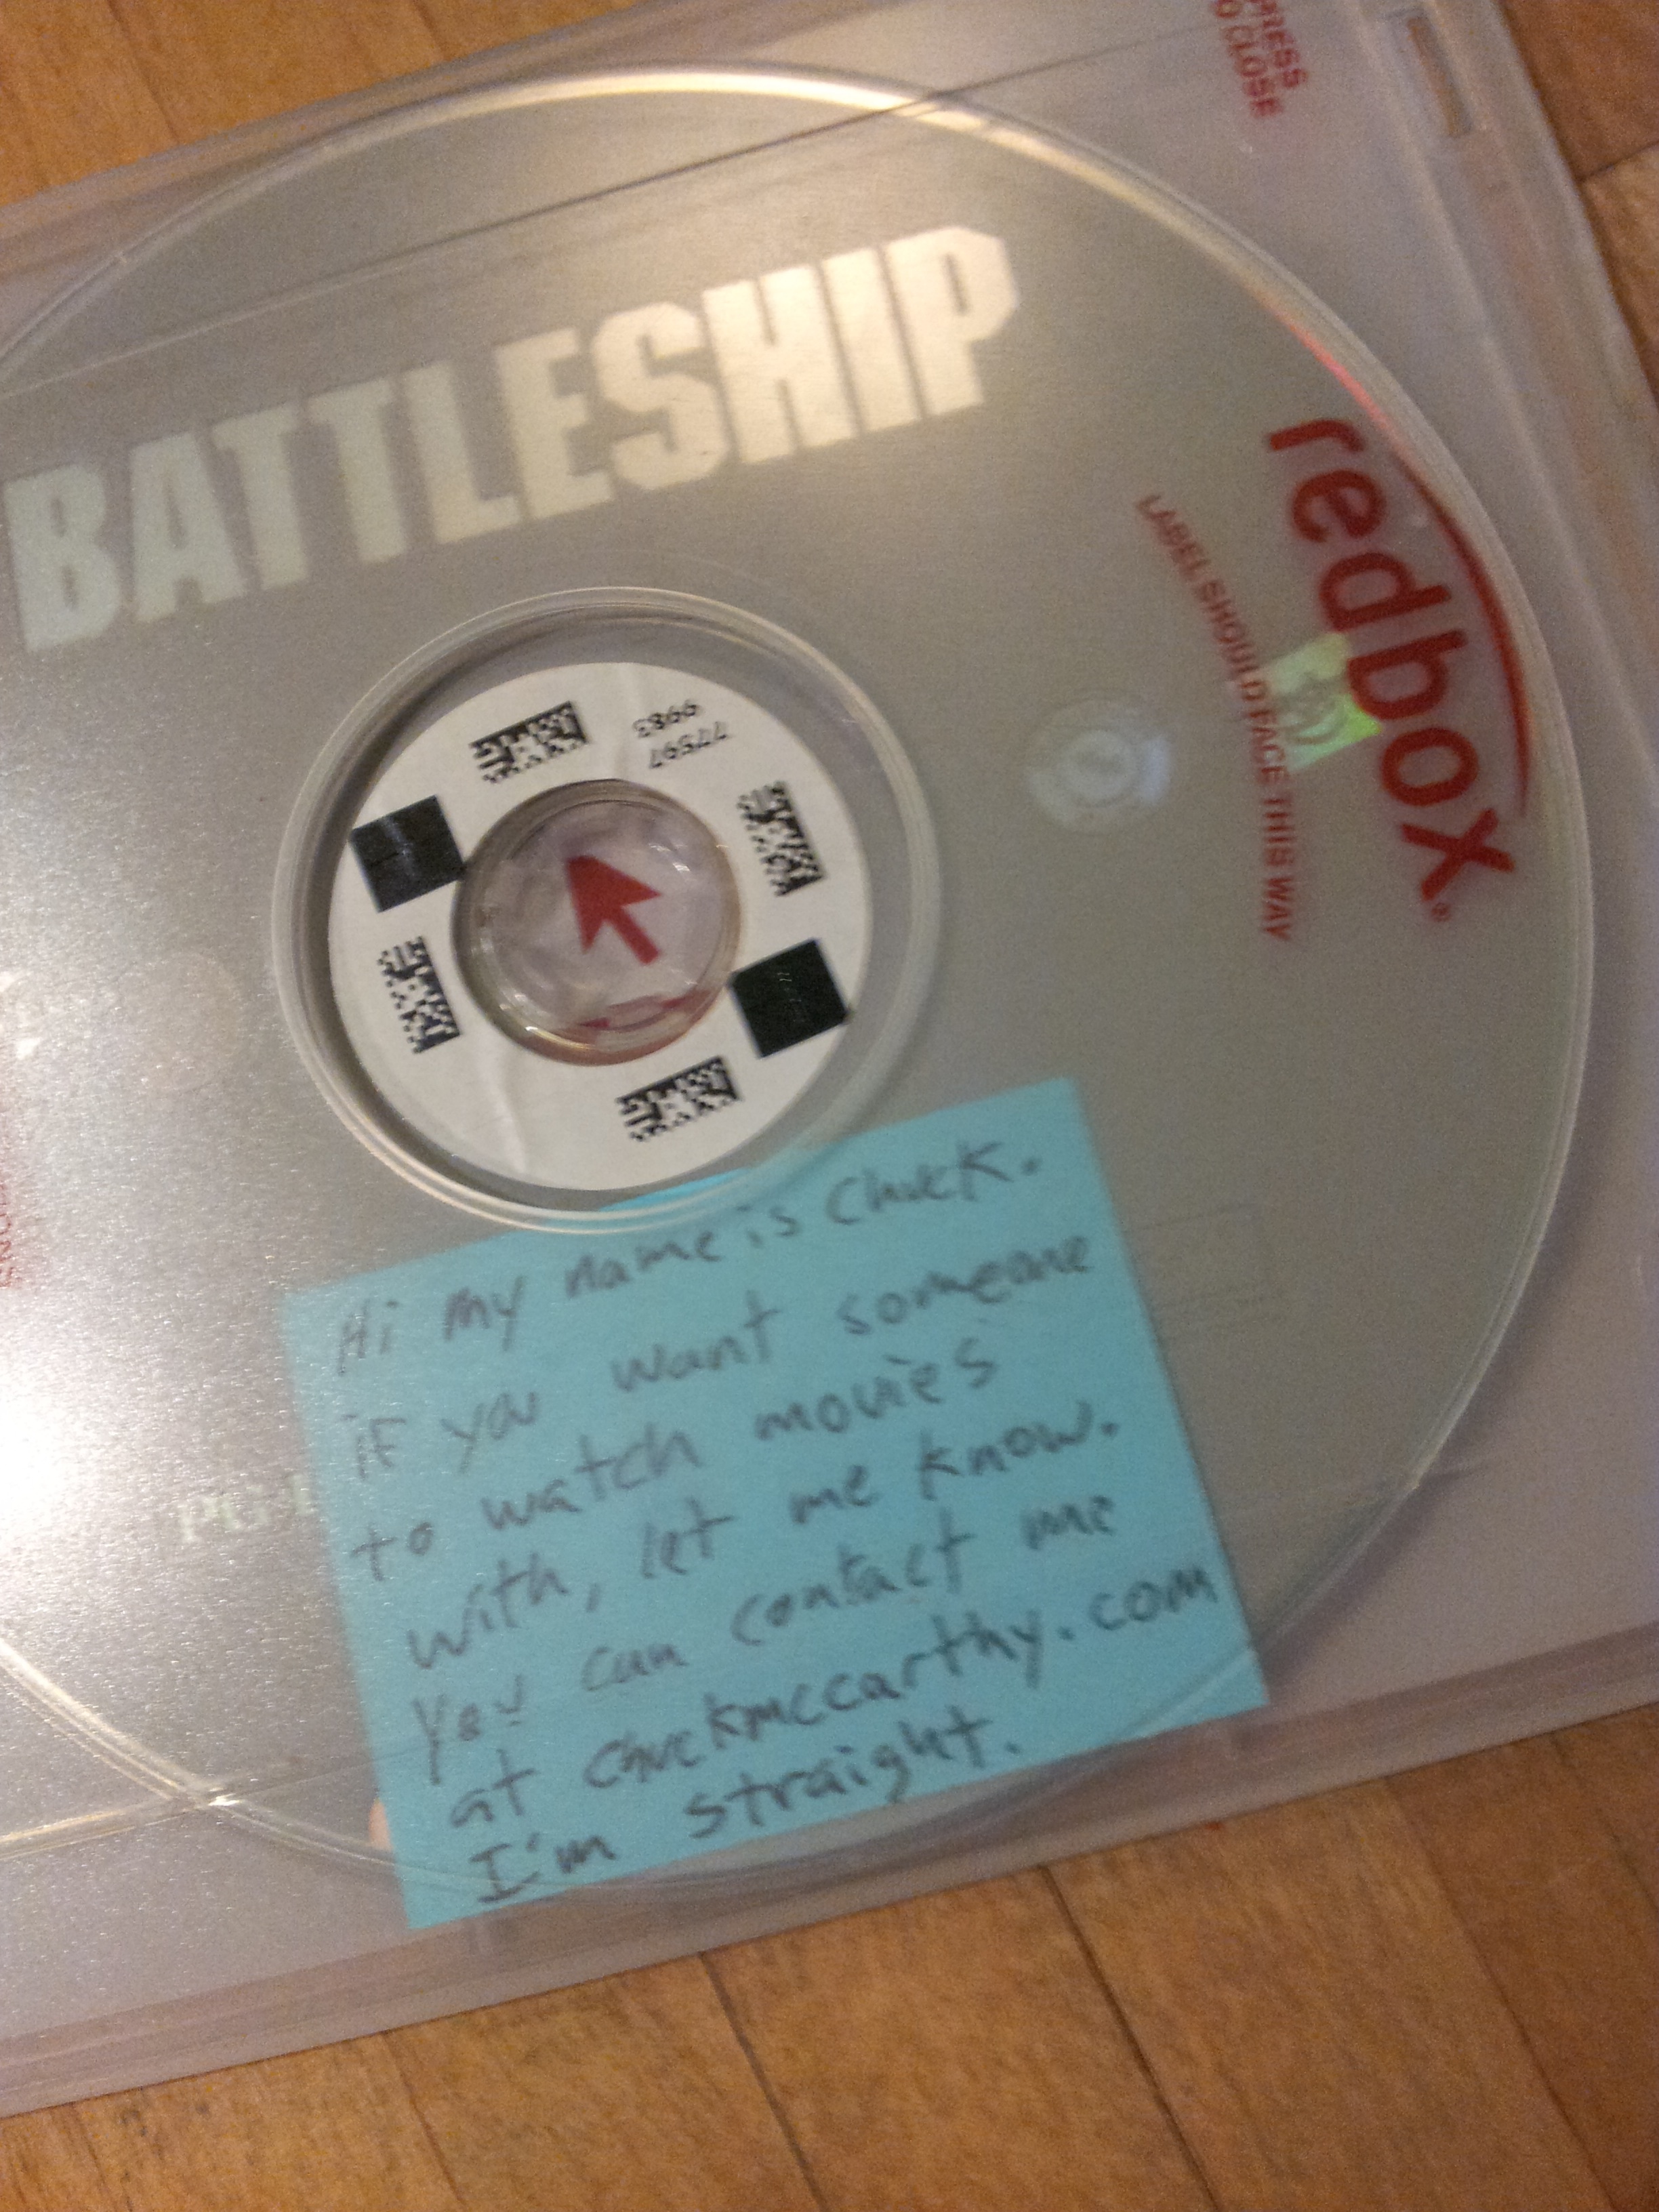 I have started doing what I call Redbox Dating.